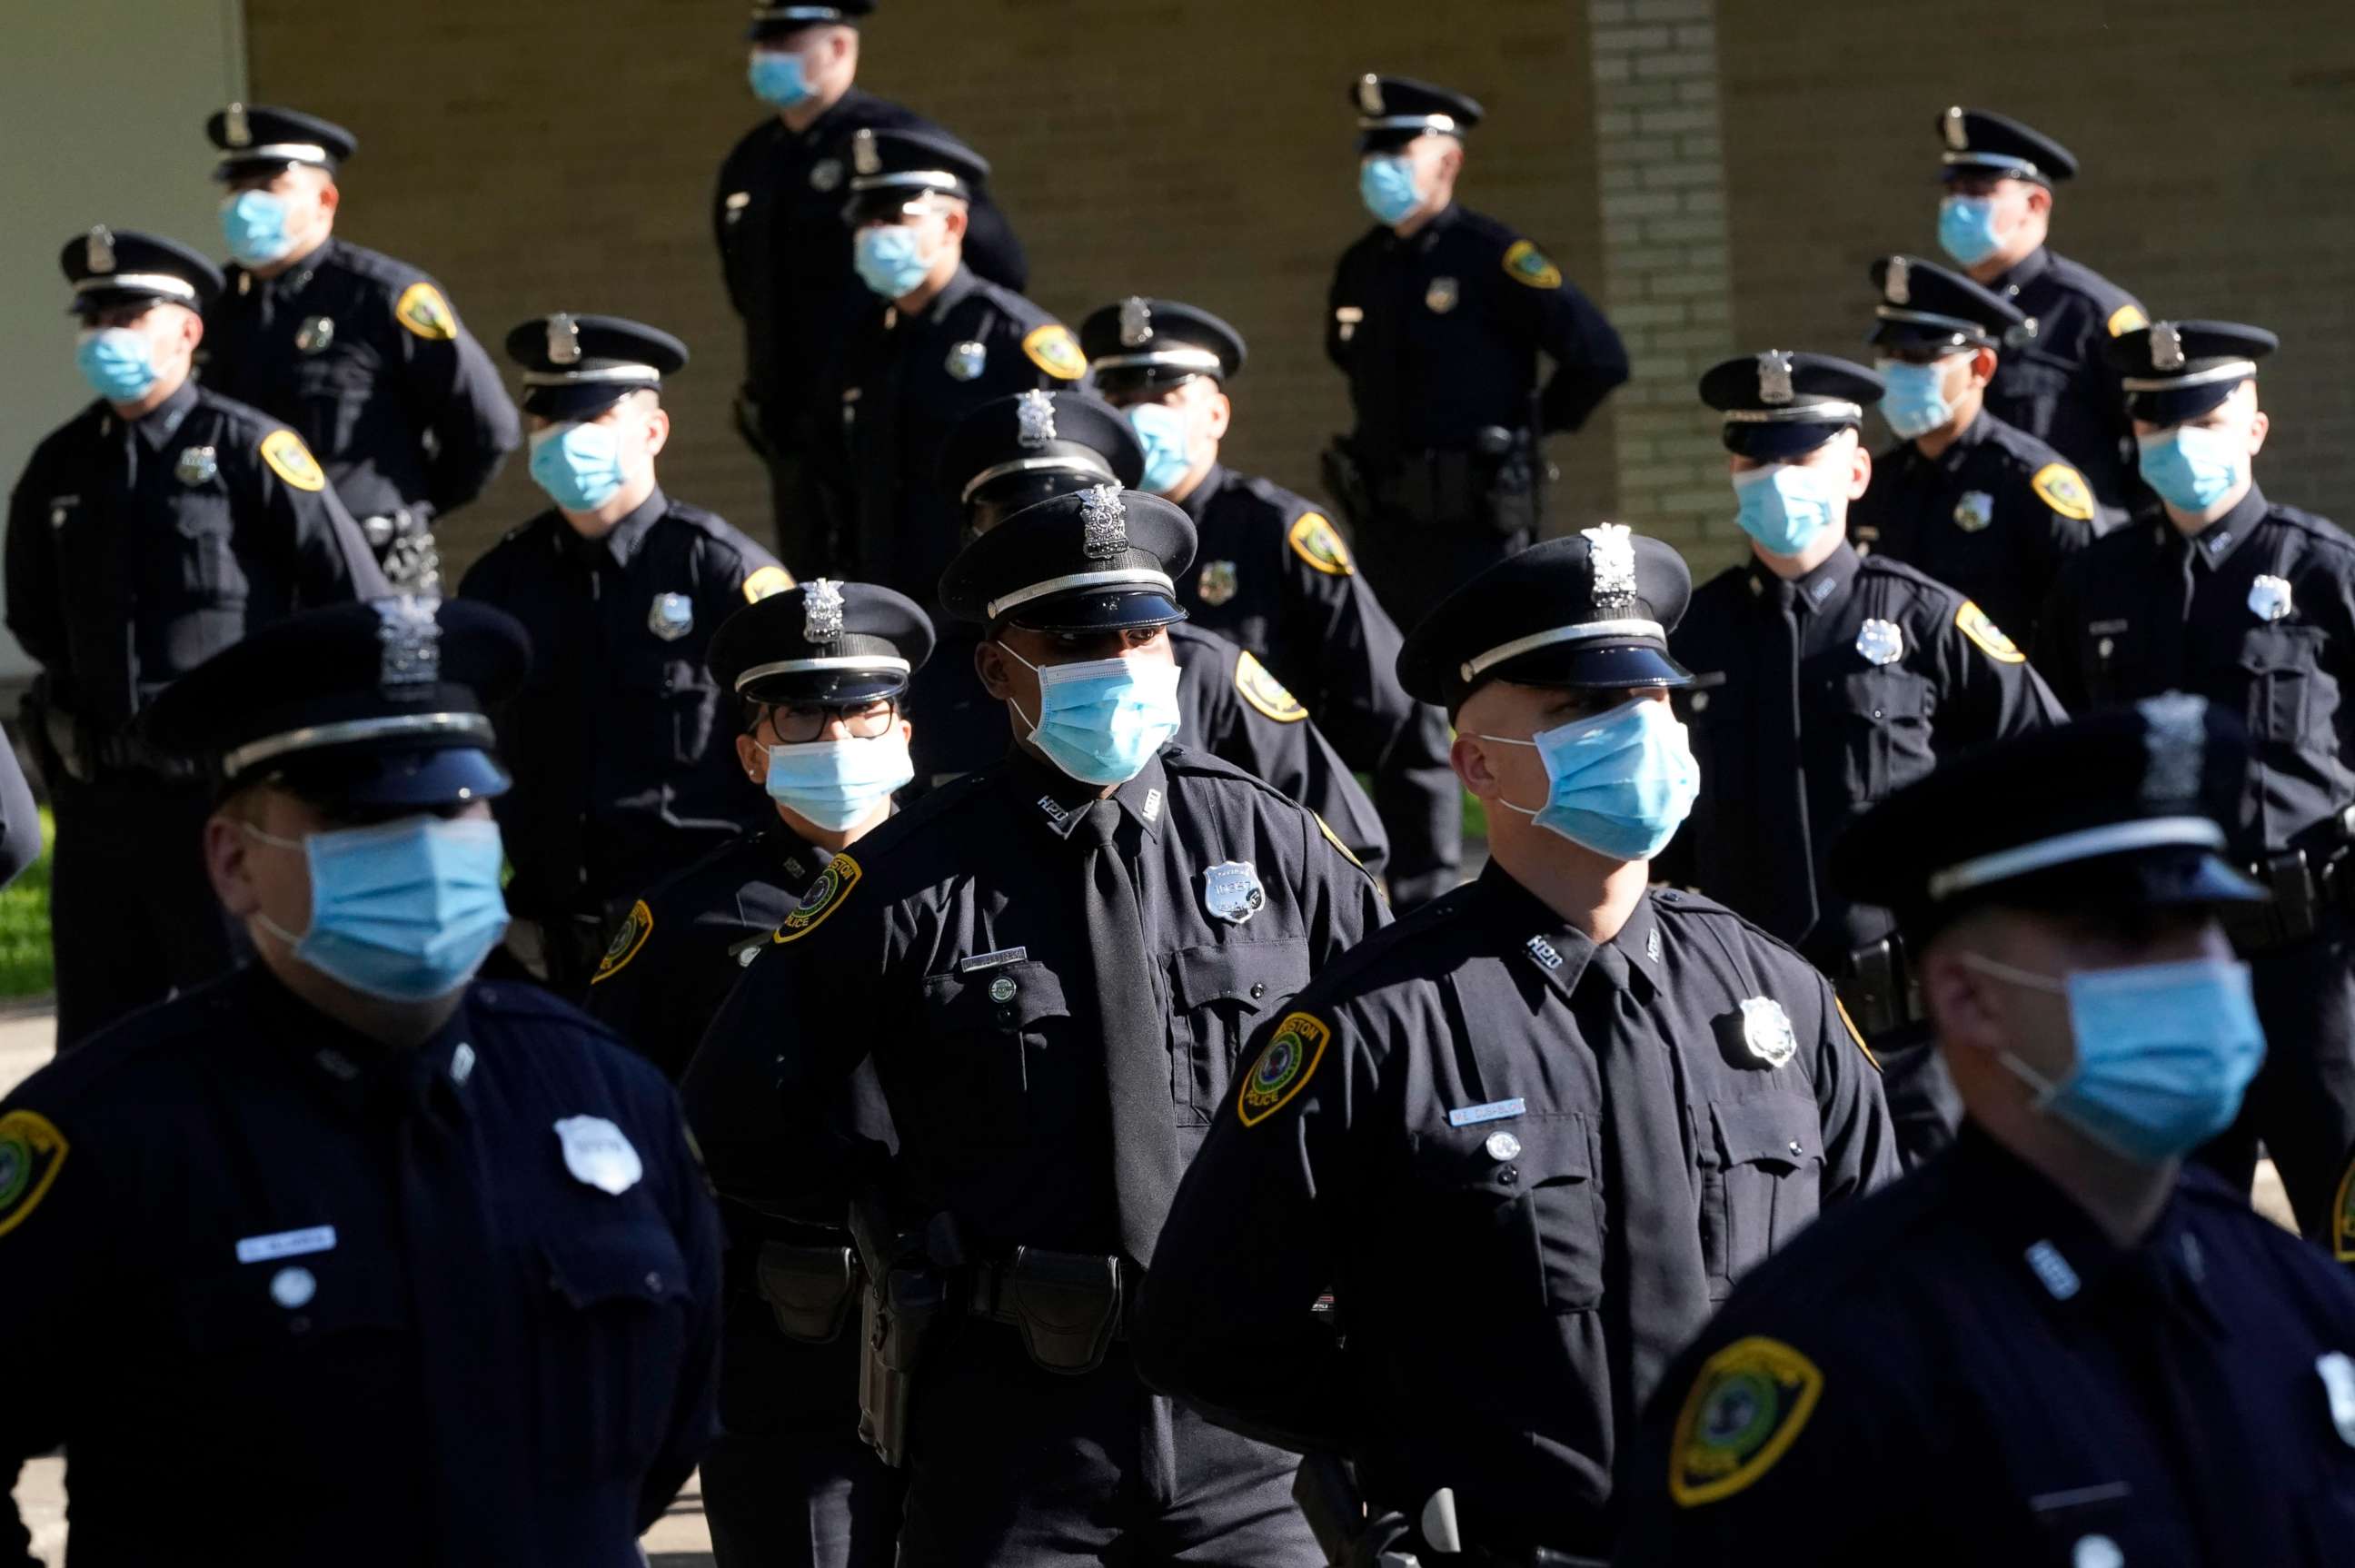 PHOTO: Houston Police cadets wear masks as they prepare to have their class photo taken during a graduation ceremony at the Houston Police Academy, amid the COVID-19 pandemic, Friday, May 1, 2020, in Houston.